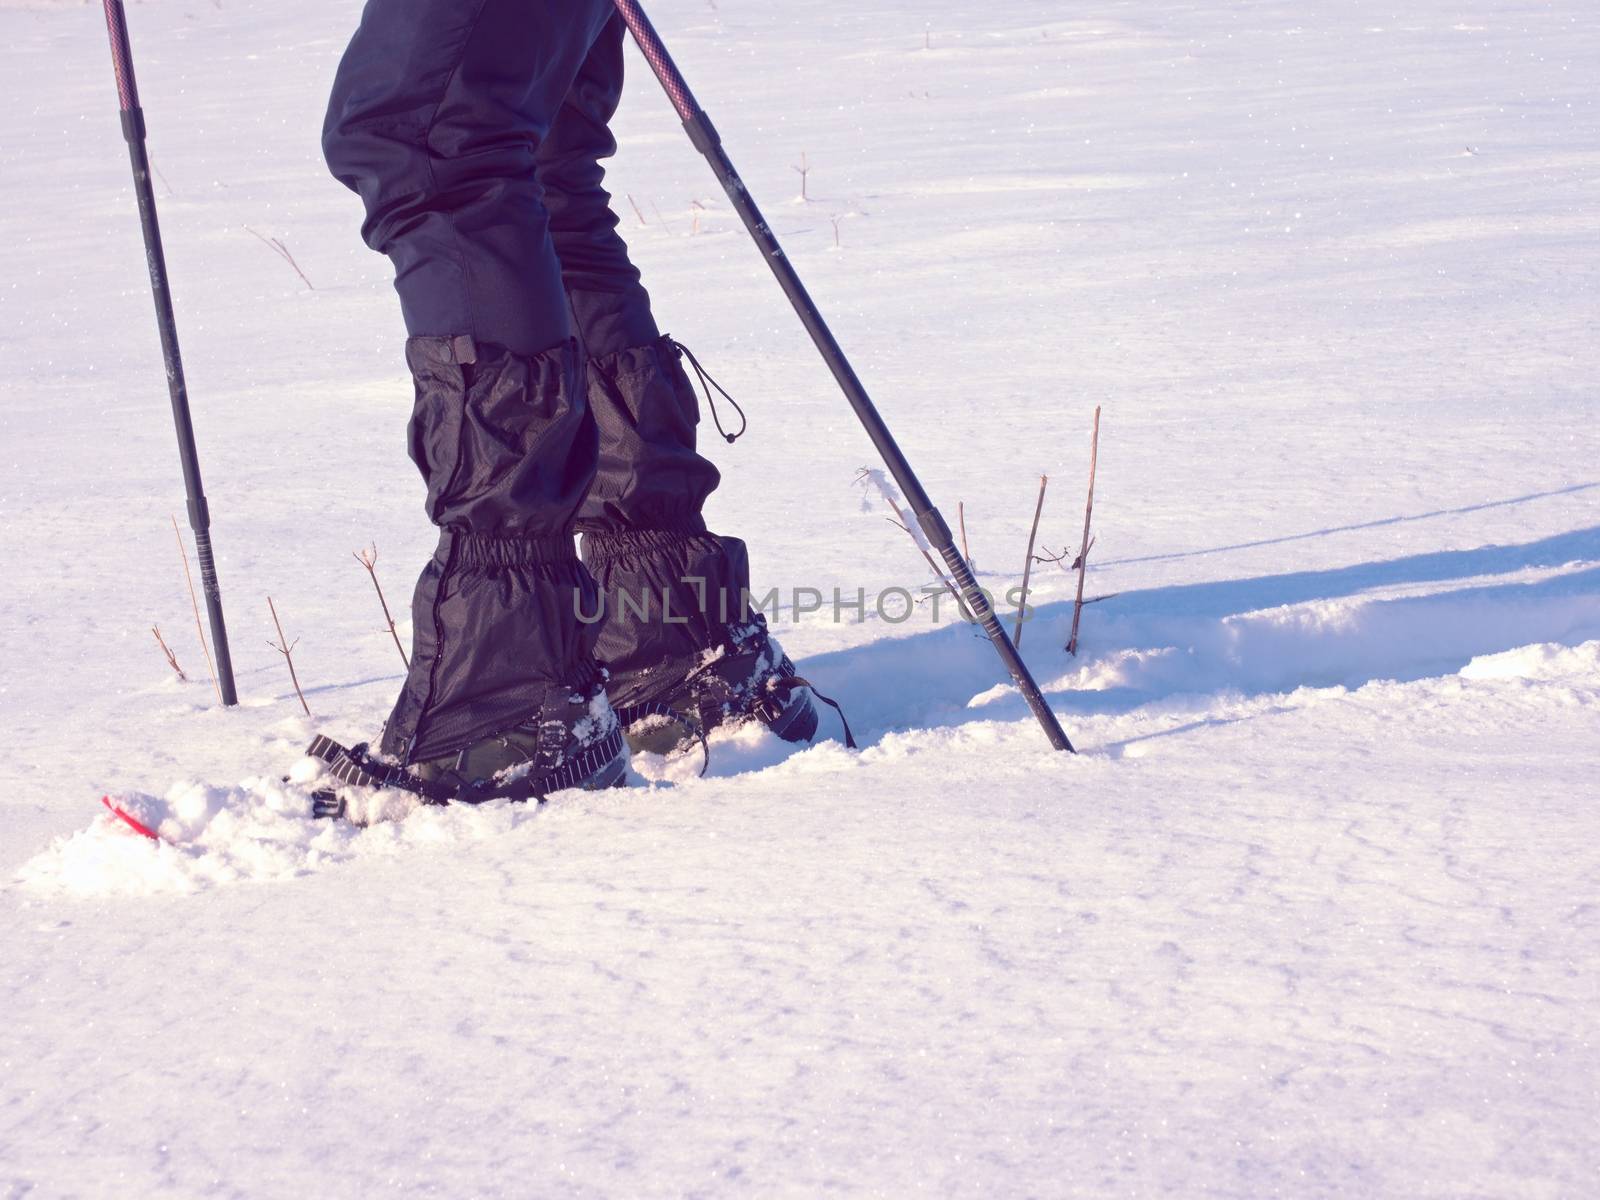 Man legs with snowshoes walk in snow. Detail of winter hike in snowdrift by rdonar2